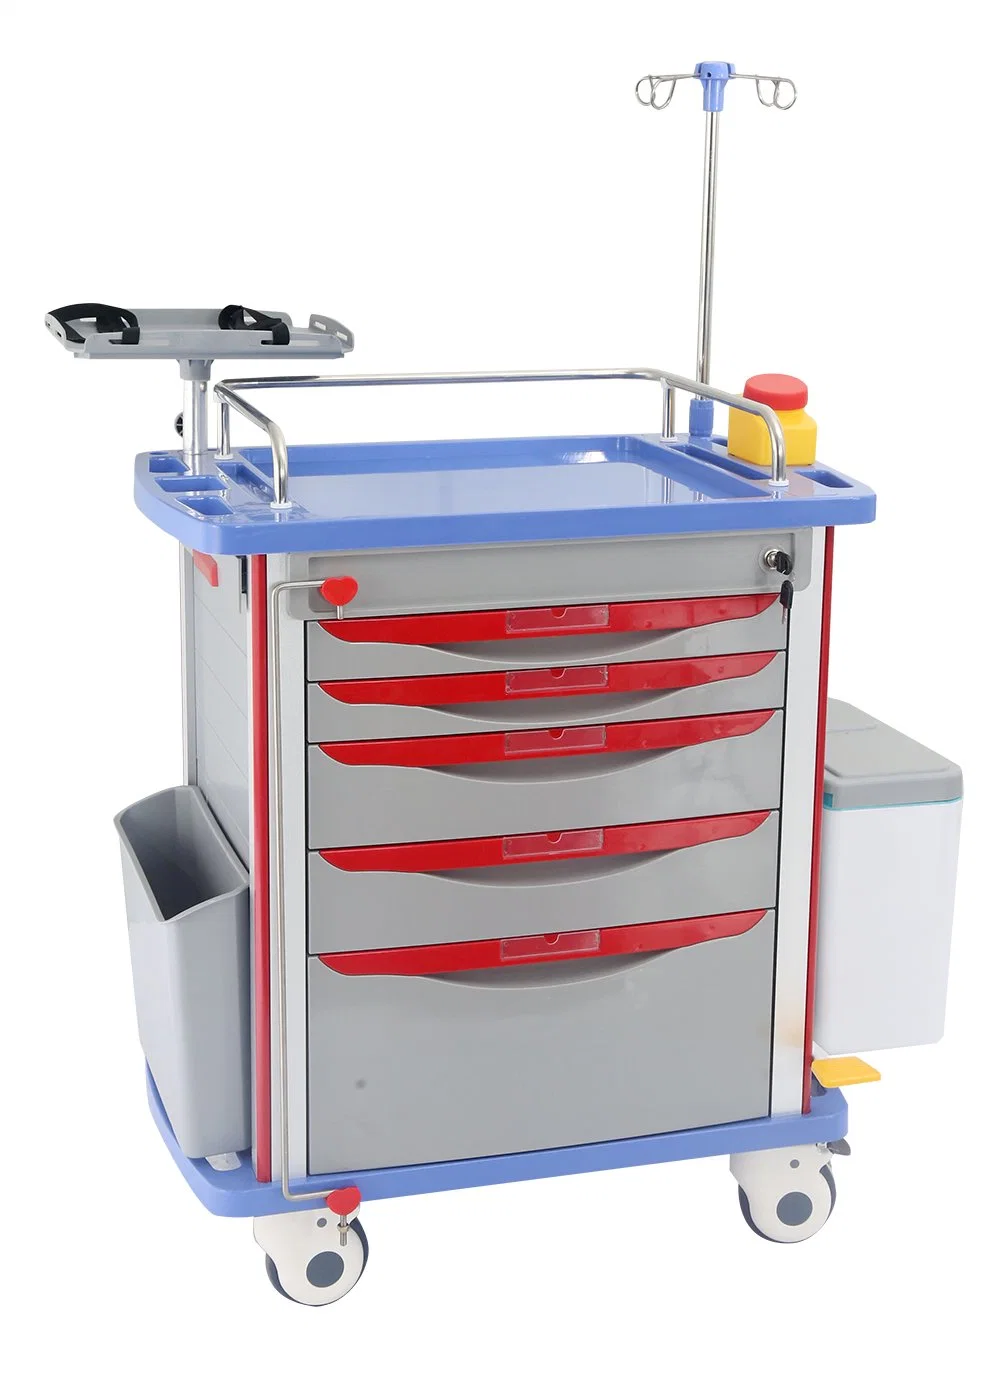 [ET750] ABS Emergency Trolley and Cart with Drawers for Medical,Logistic,Linen,Treatment,Anesthesia, Medicine Distribution as Hospital Furniture and Equipment